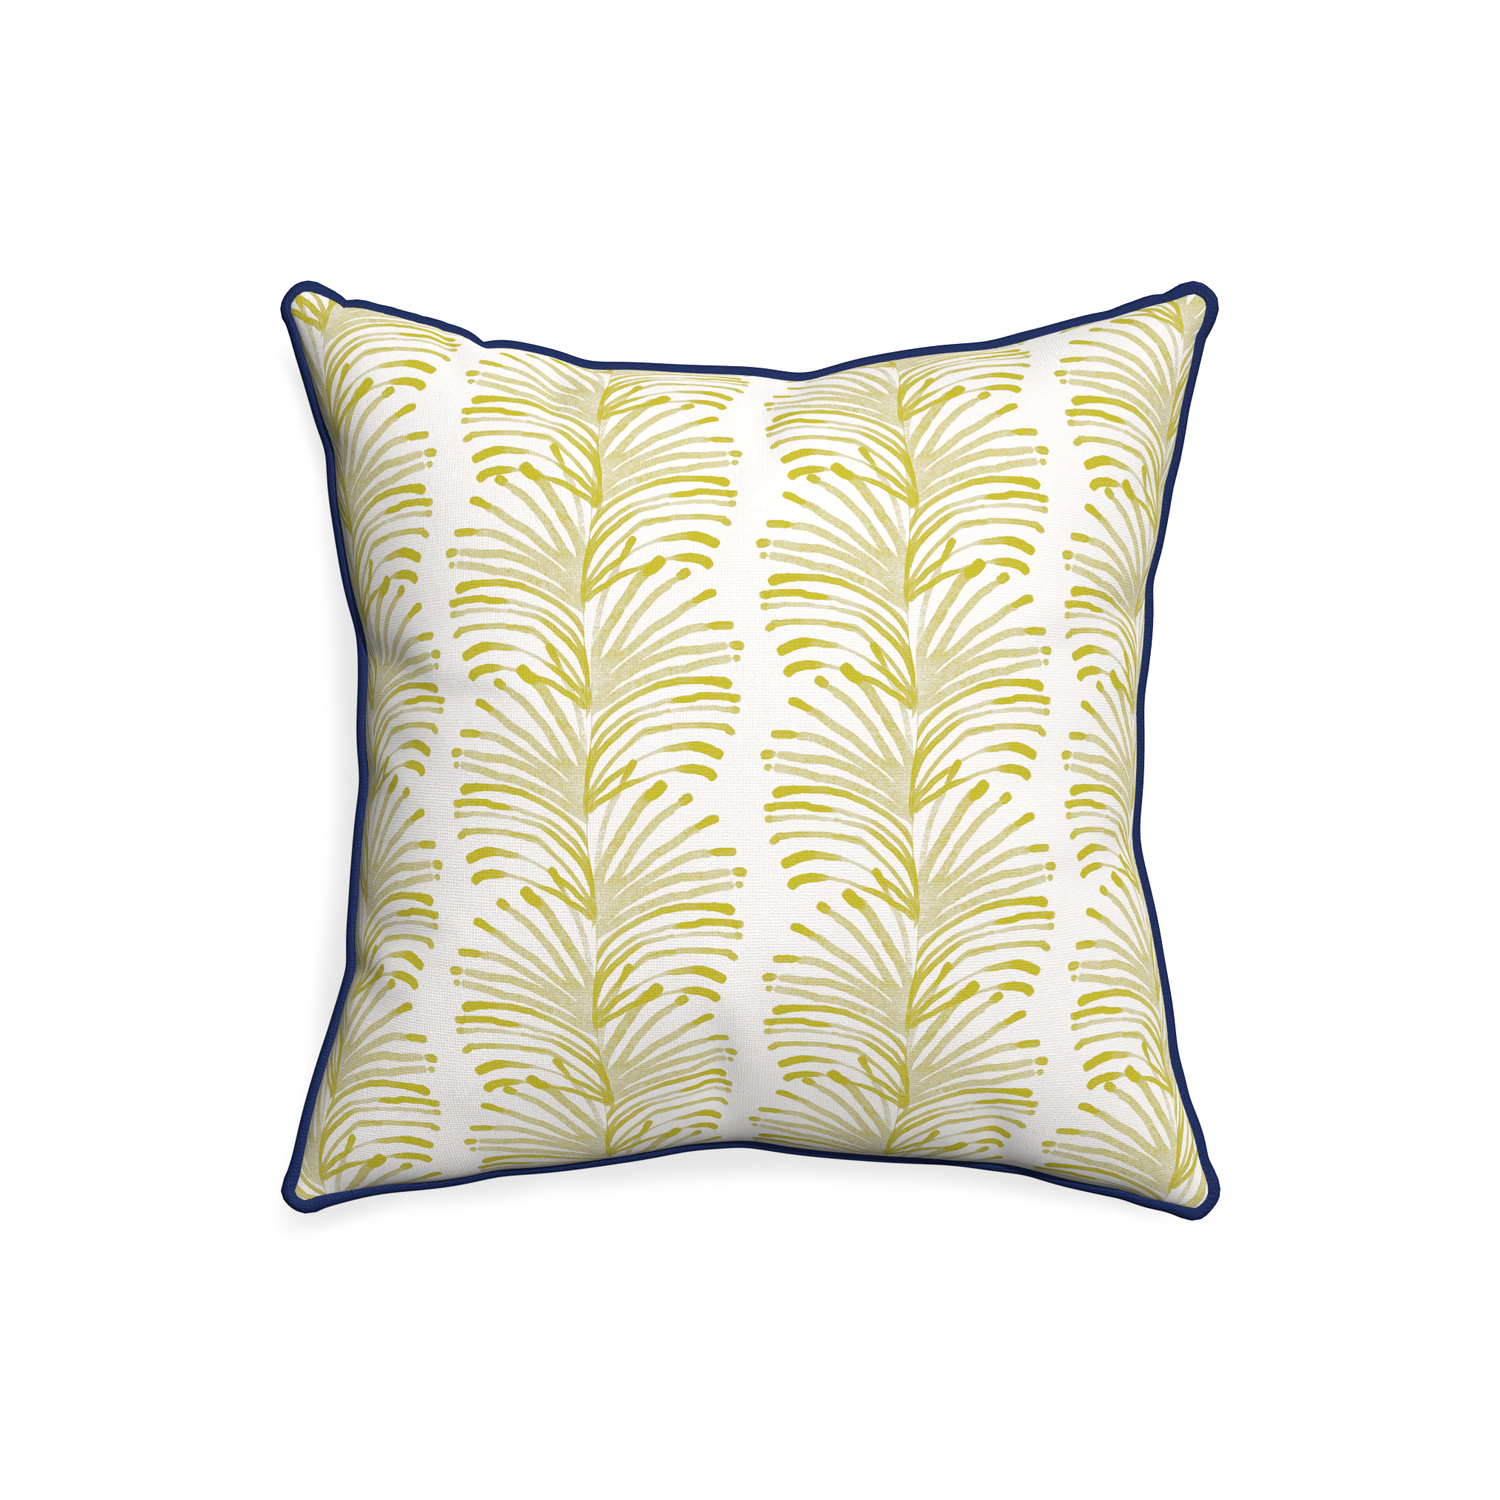 20-square emma chartreuse custom yellow stripe chartreusepillow with midnight piping on white background